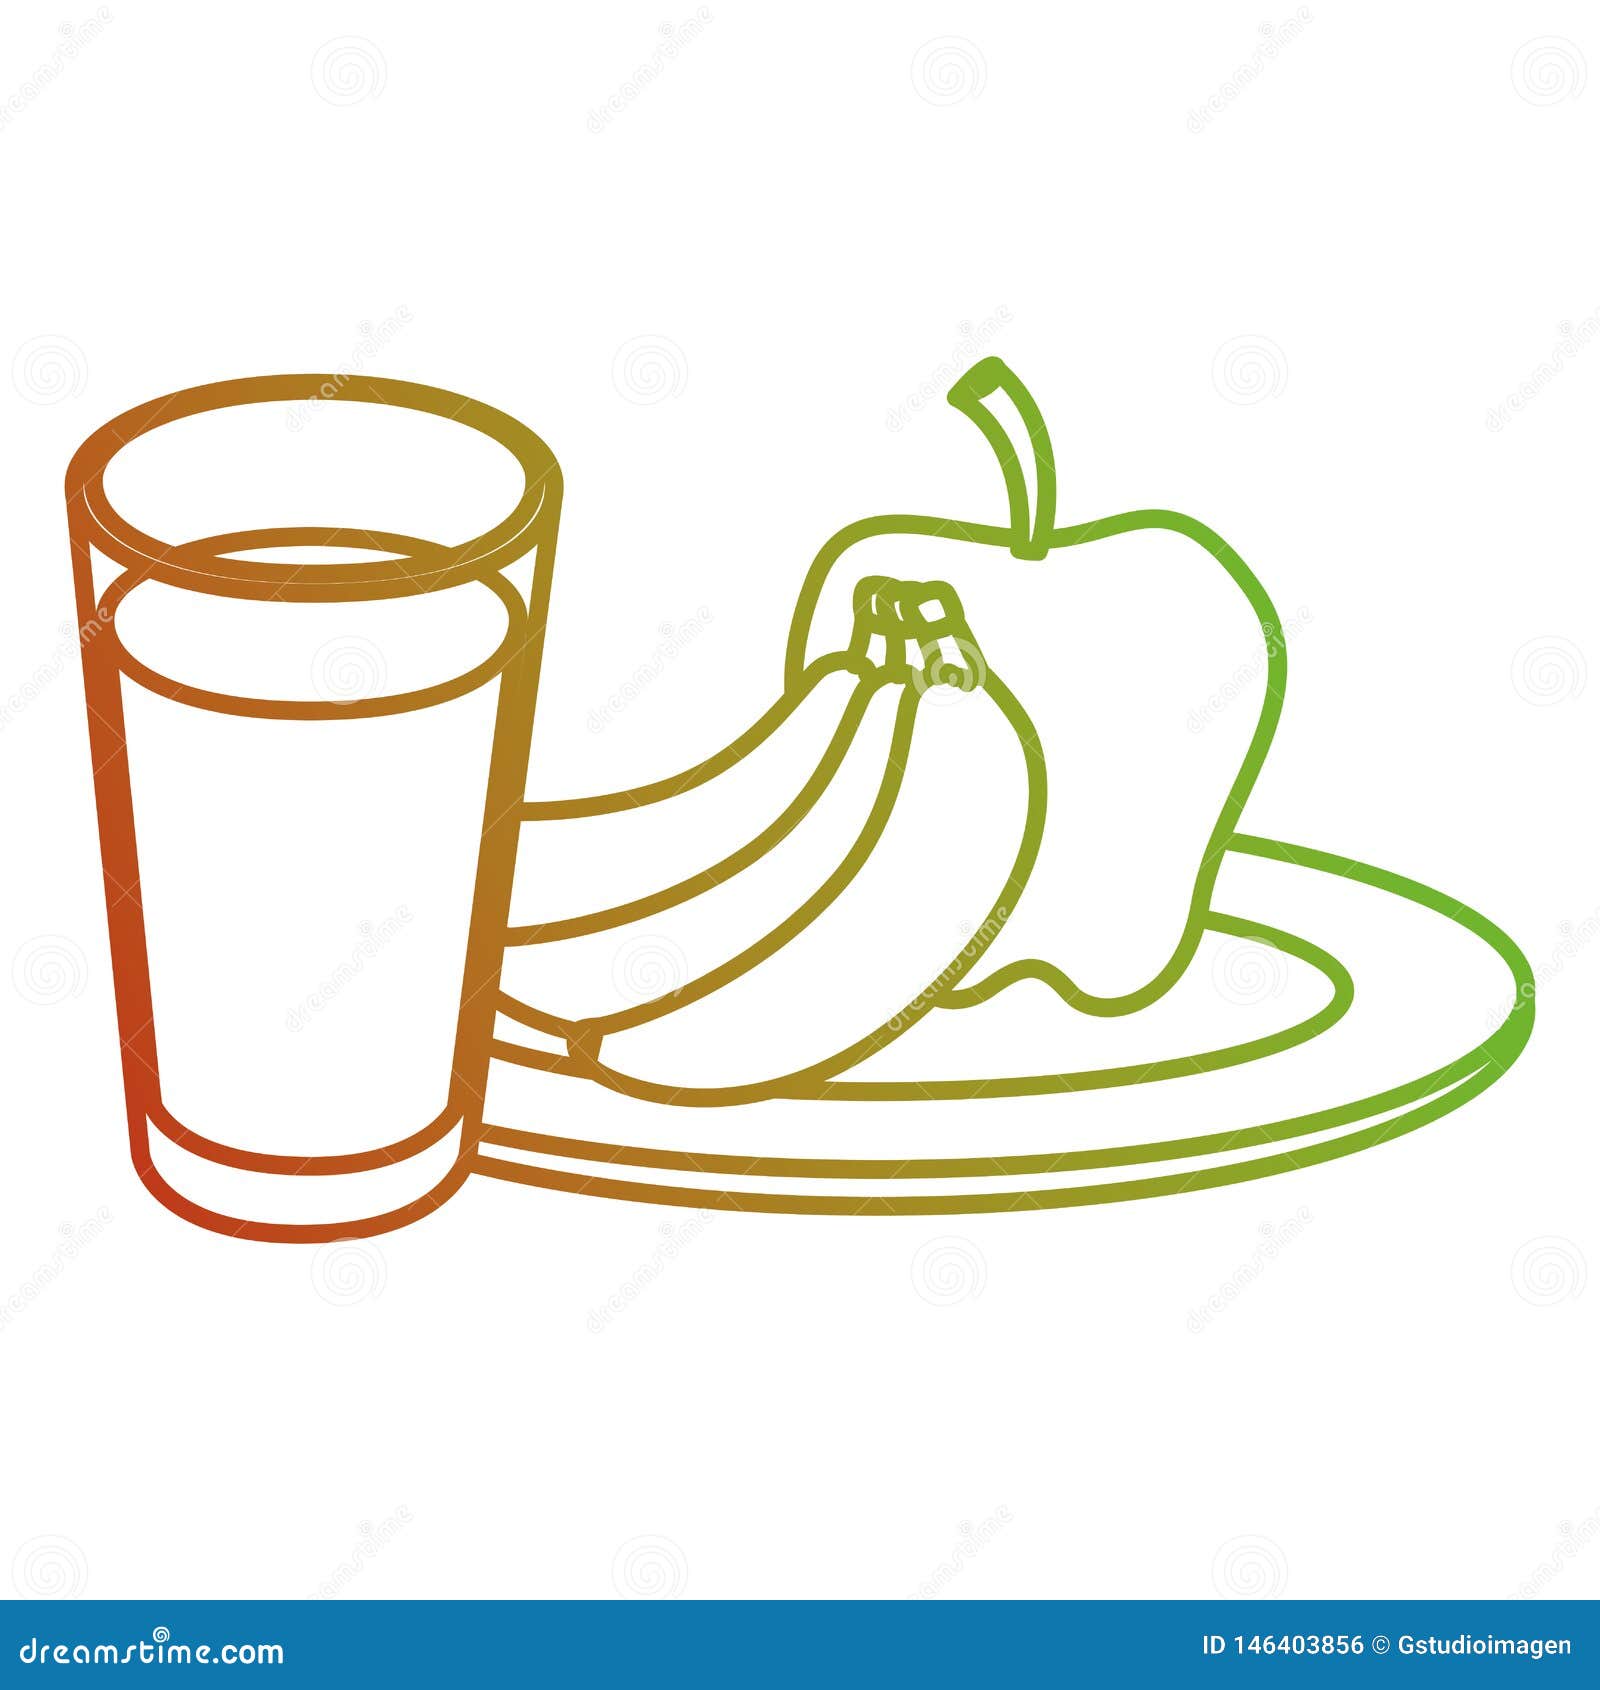 fruits with juice icons vector illustration design